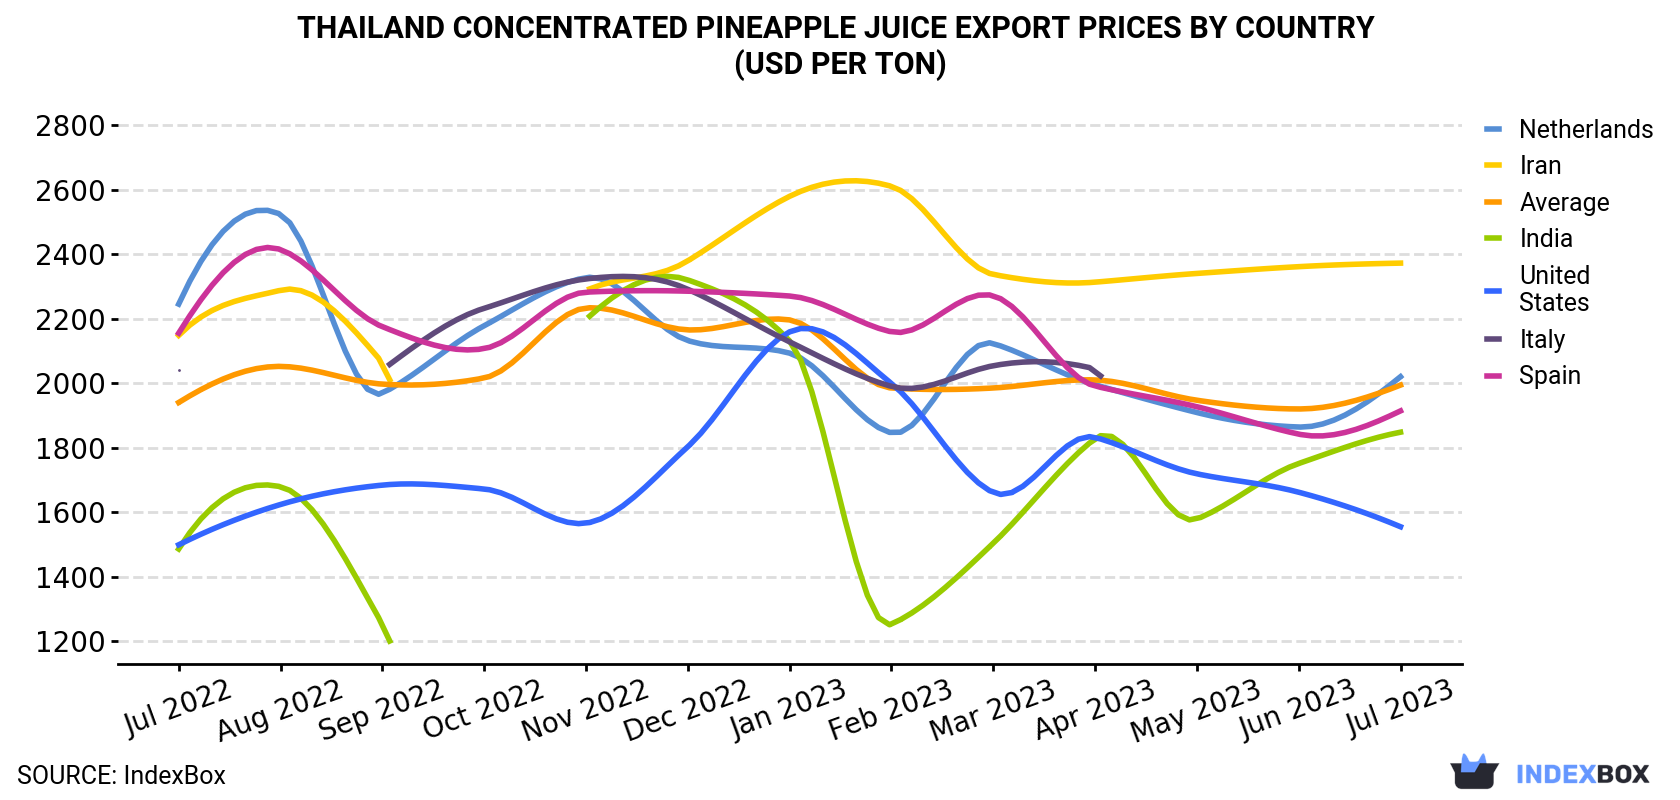 Thailand Concentrated Pineapple Juice Export Prices By Country (USD Per Ton)